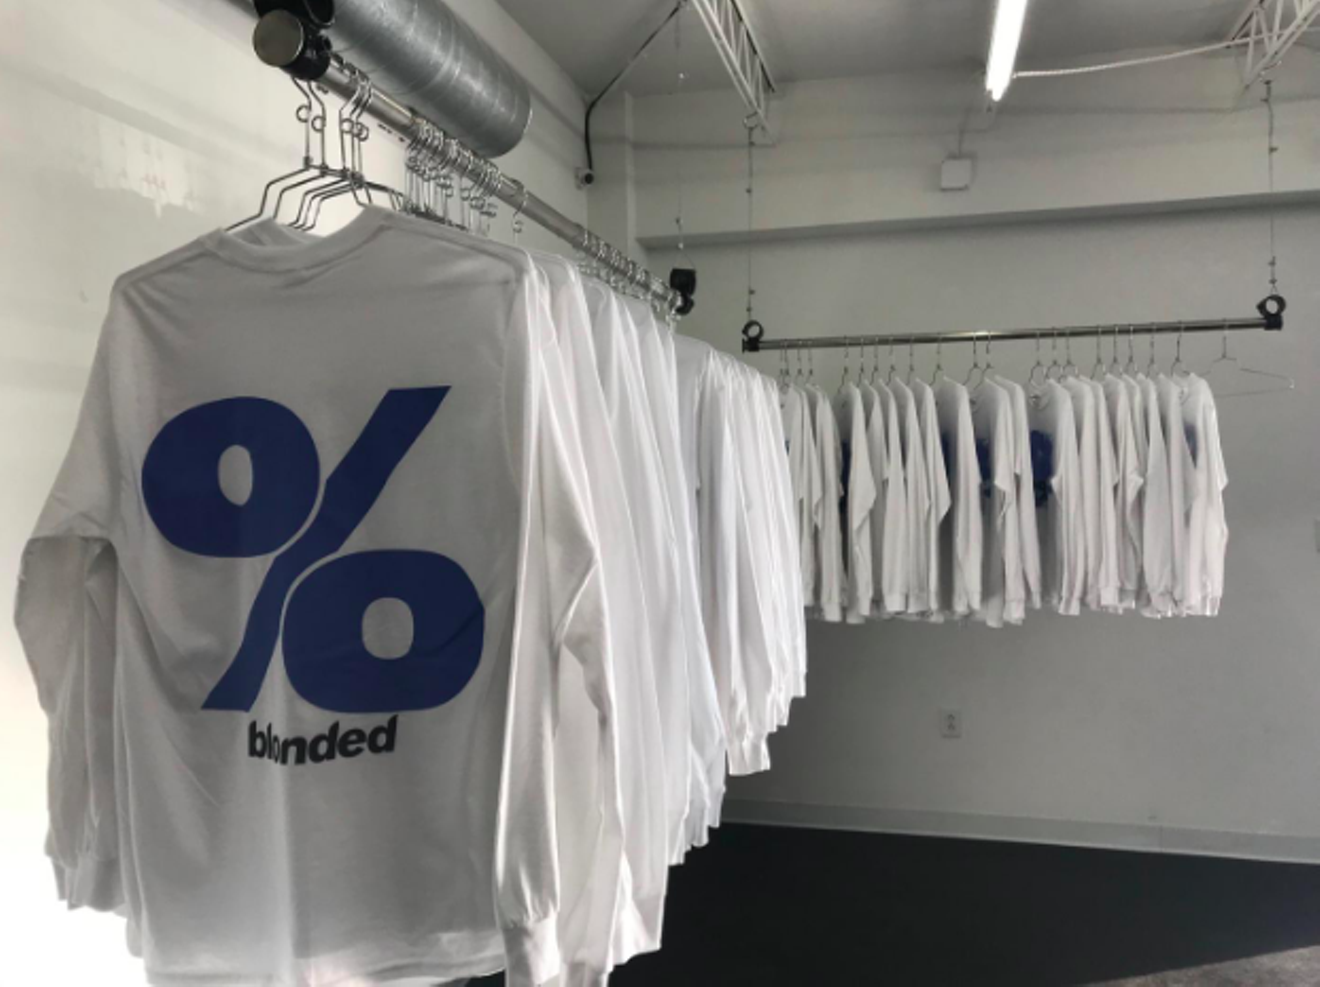 Blonded shirts that were given away hang on display inside Black Market USA on Nov. 6.